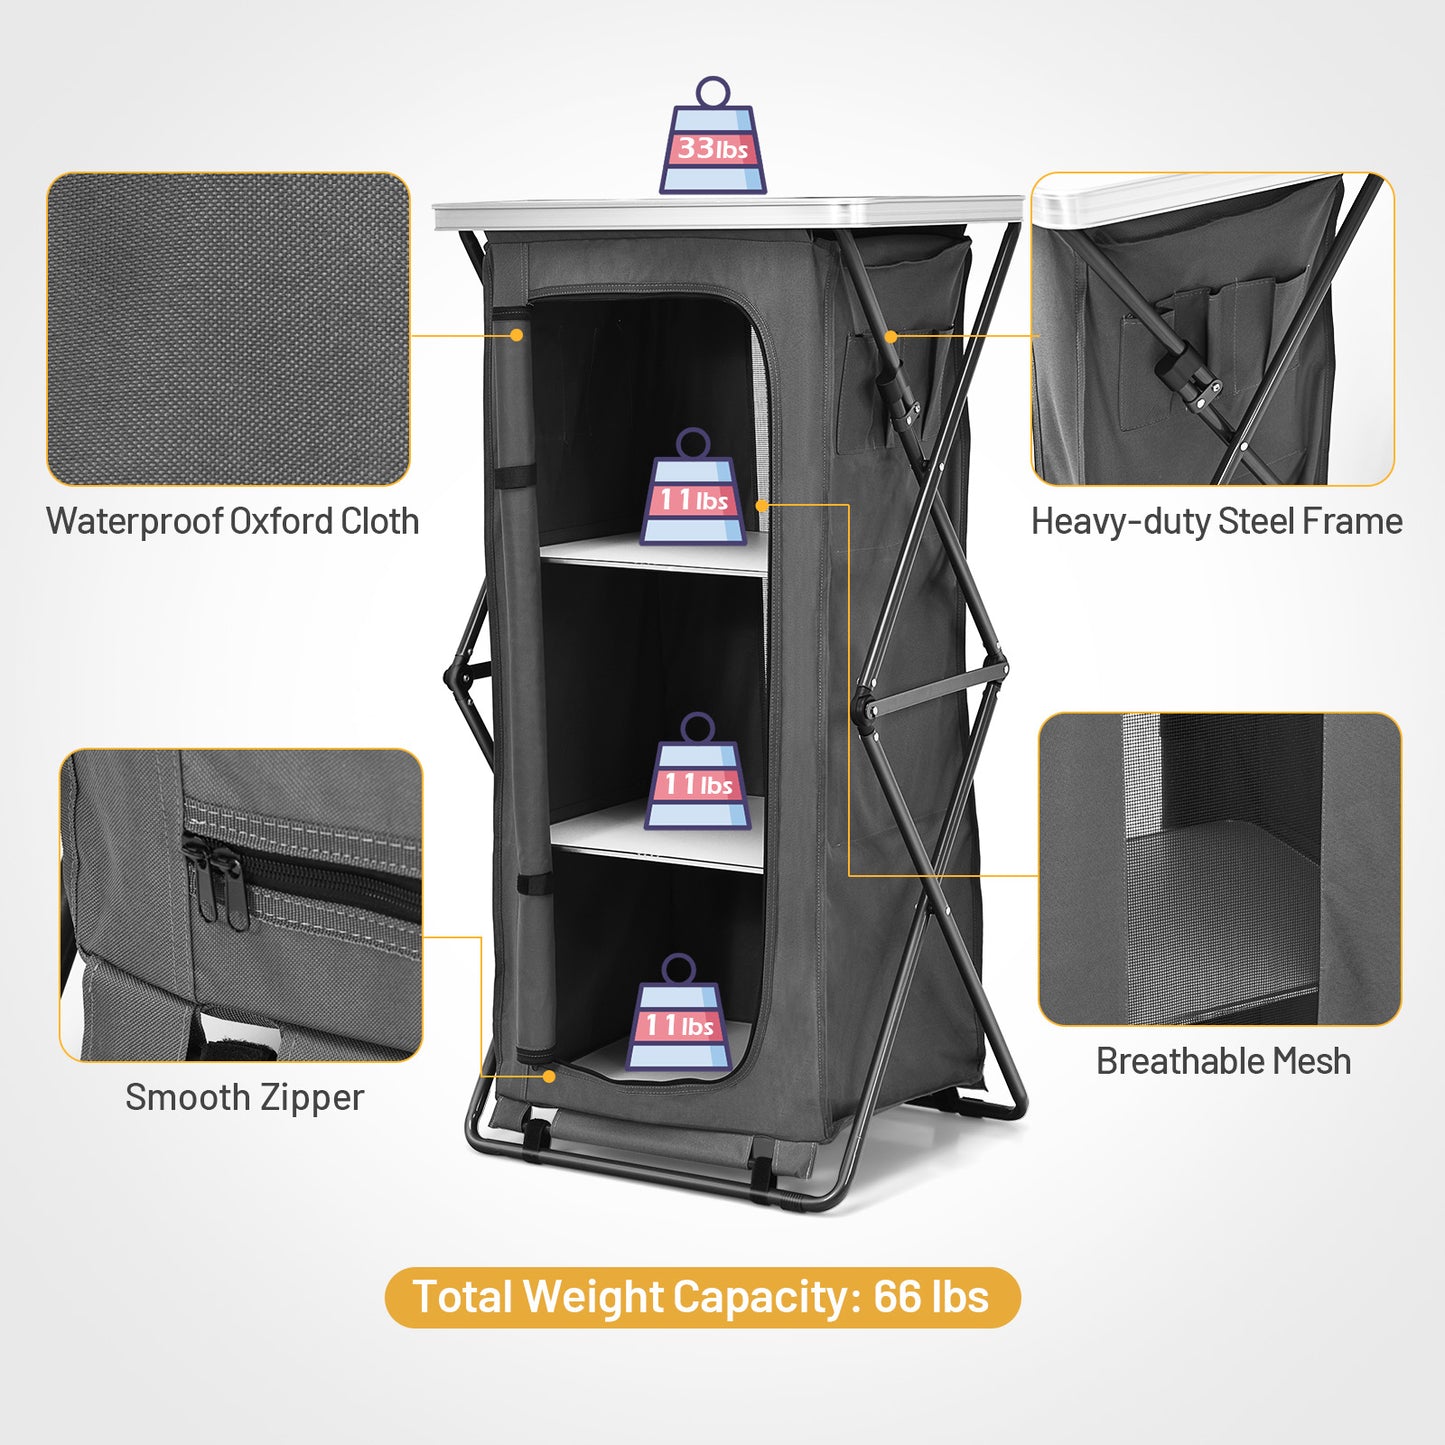 Folding Pop-Up Cupboard Compact Camping Storage Cabinet with Bag-L